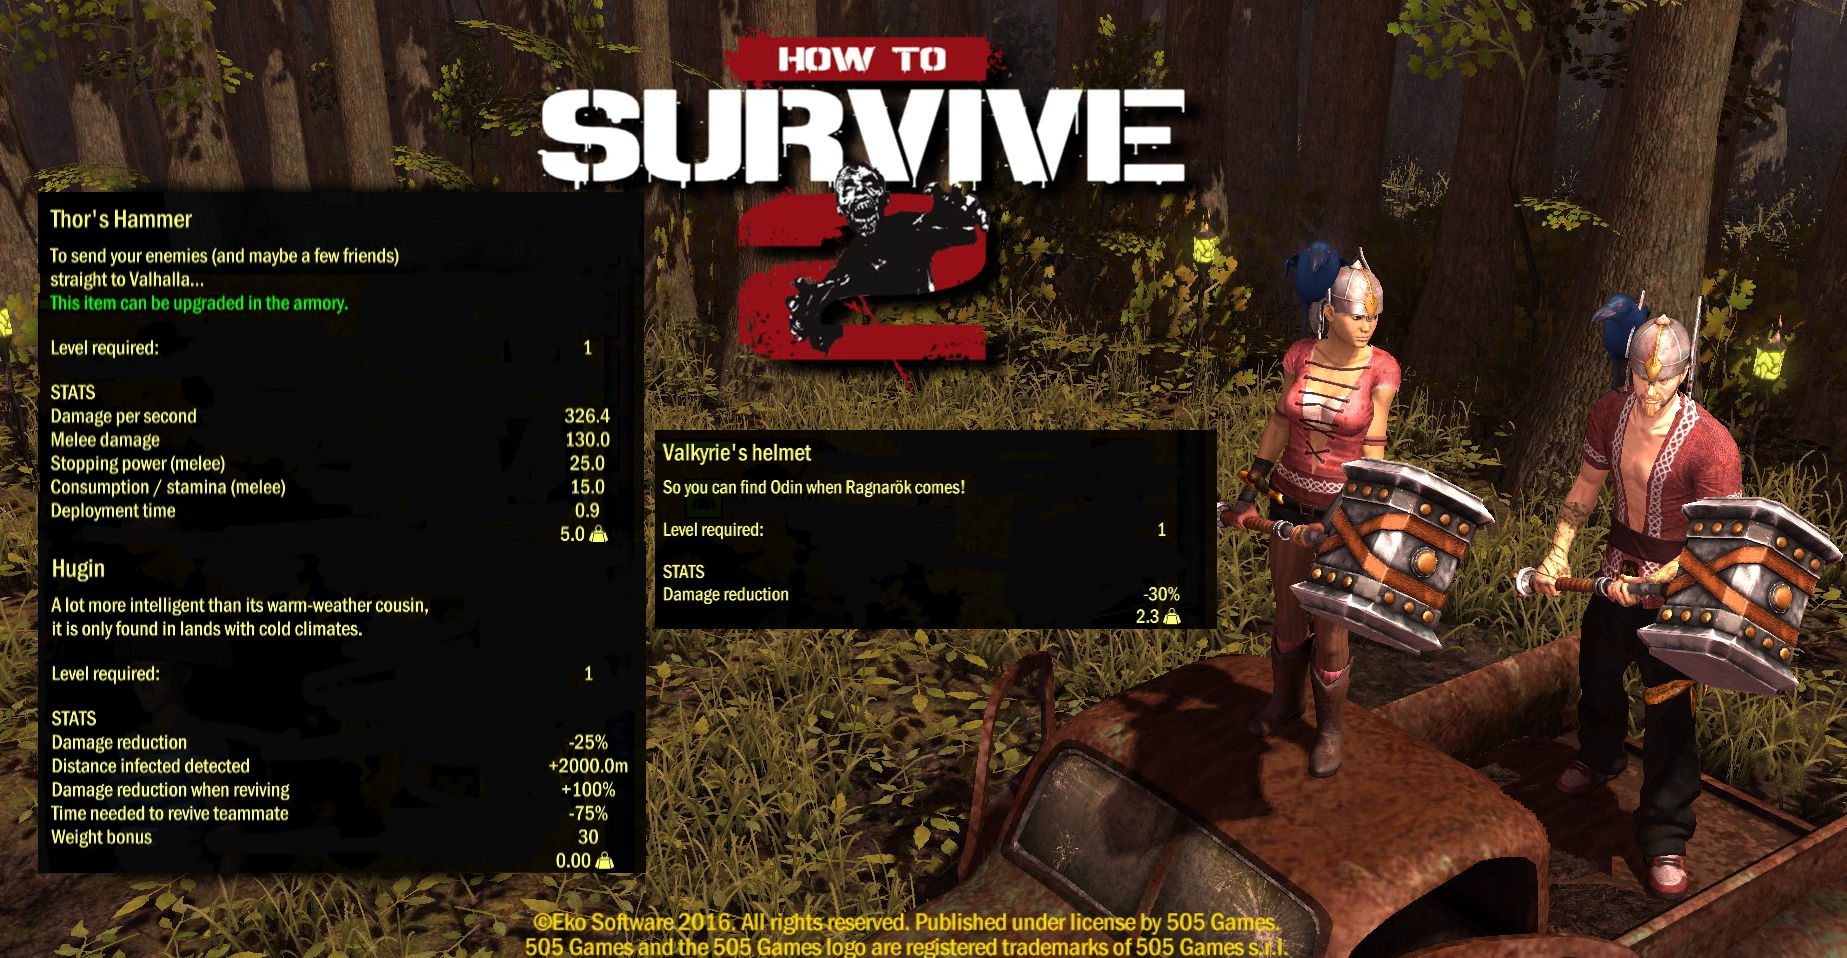 How To Survive 2 - Norse God Skin Pack Featured Screenshot #1